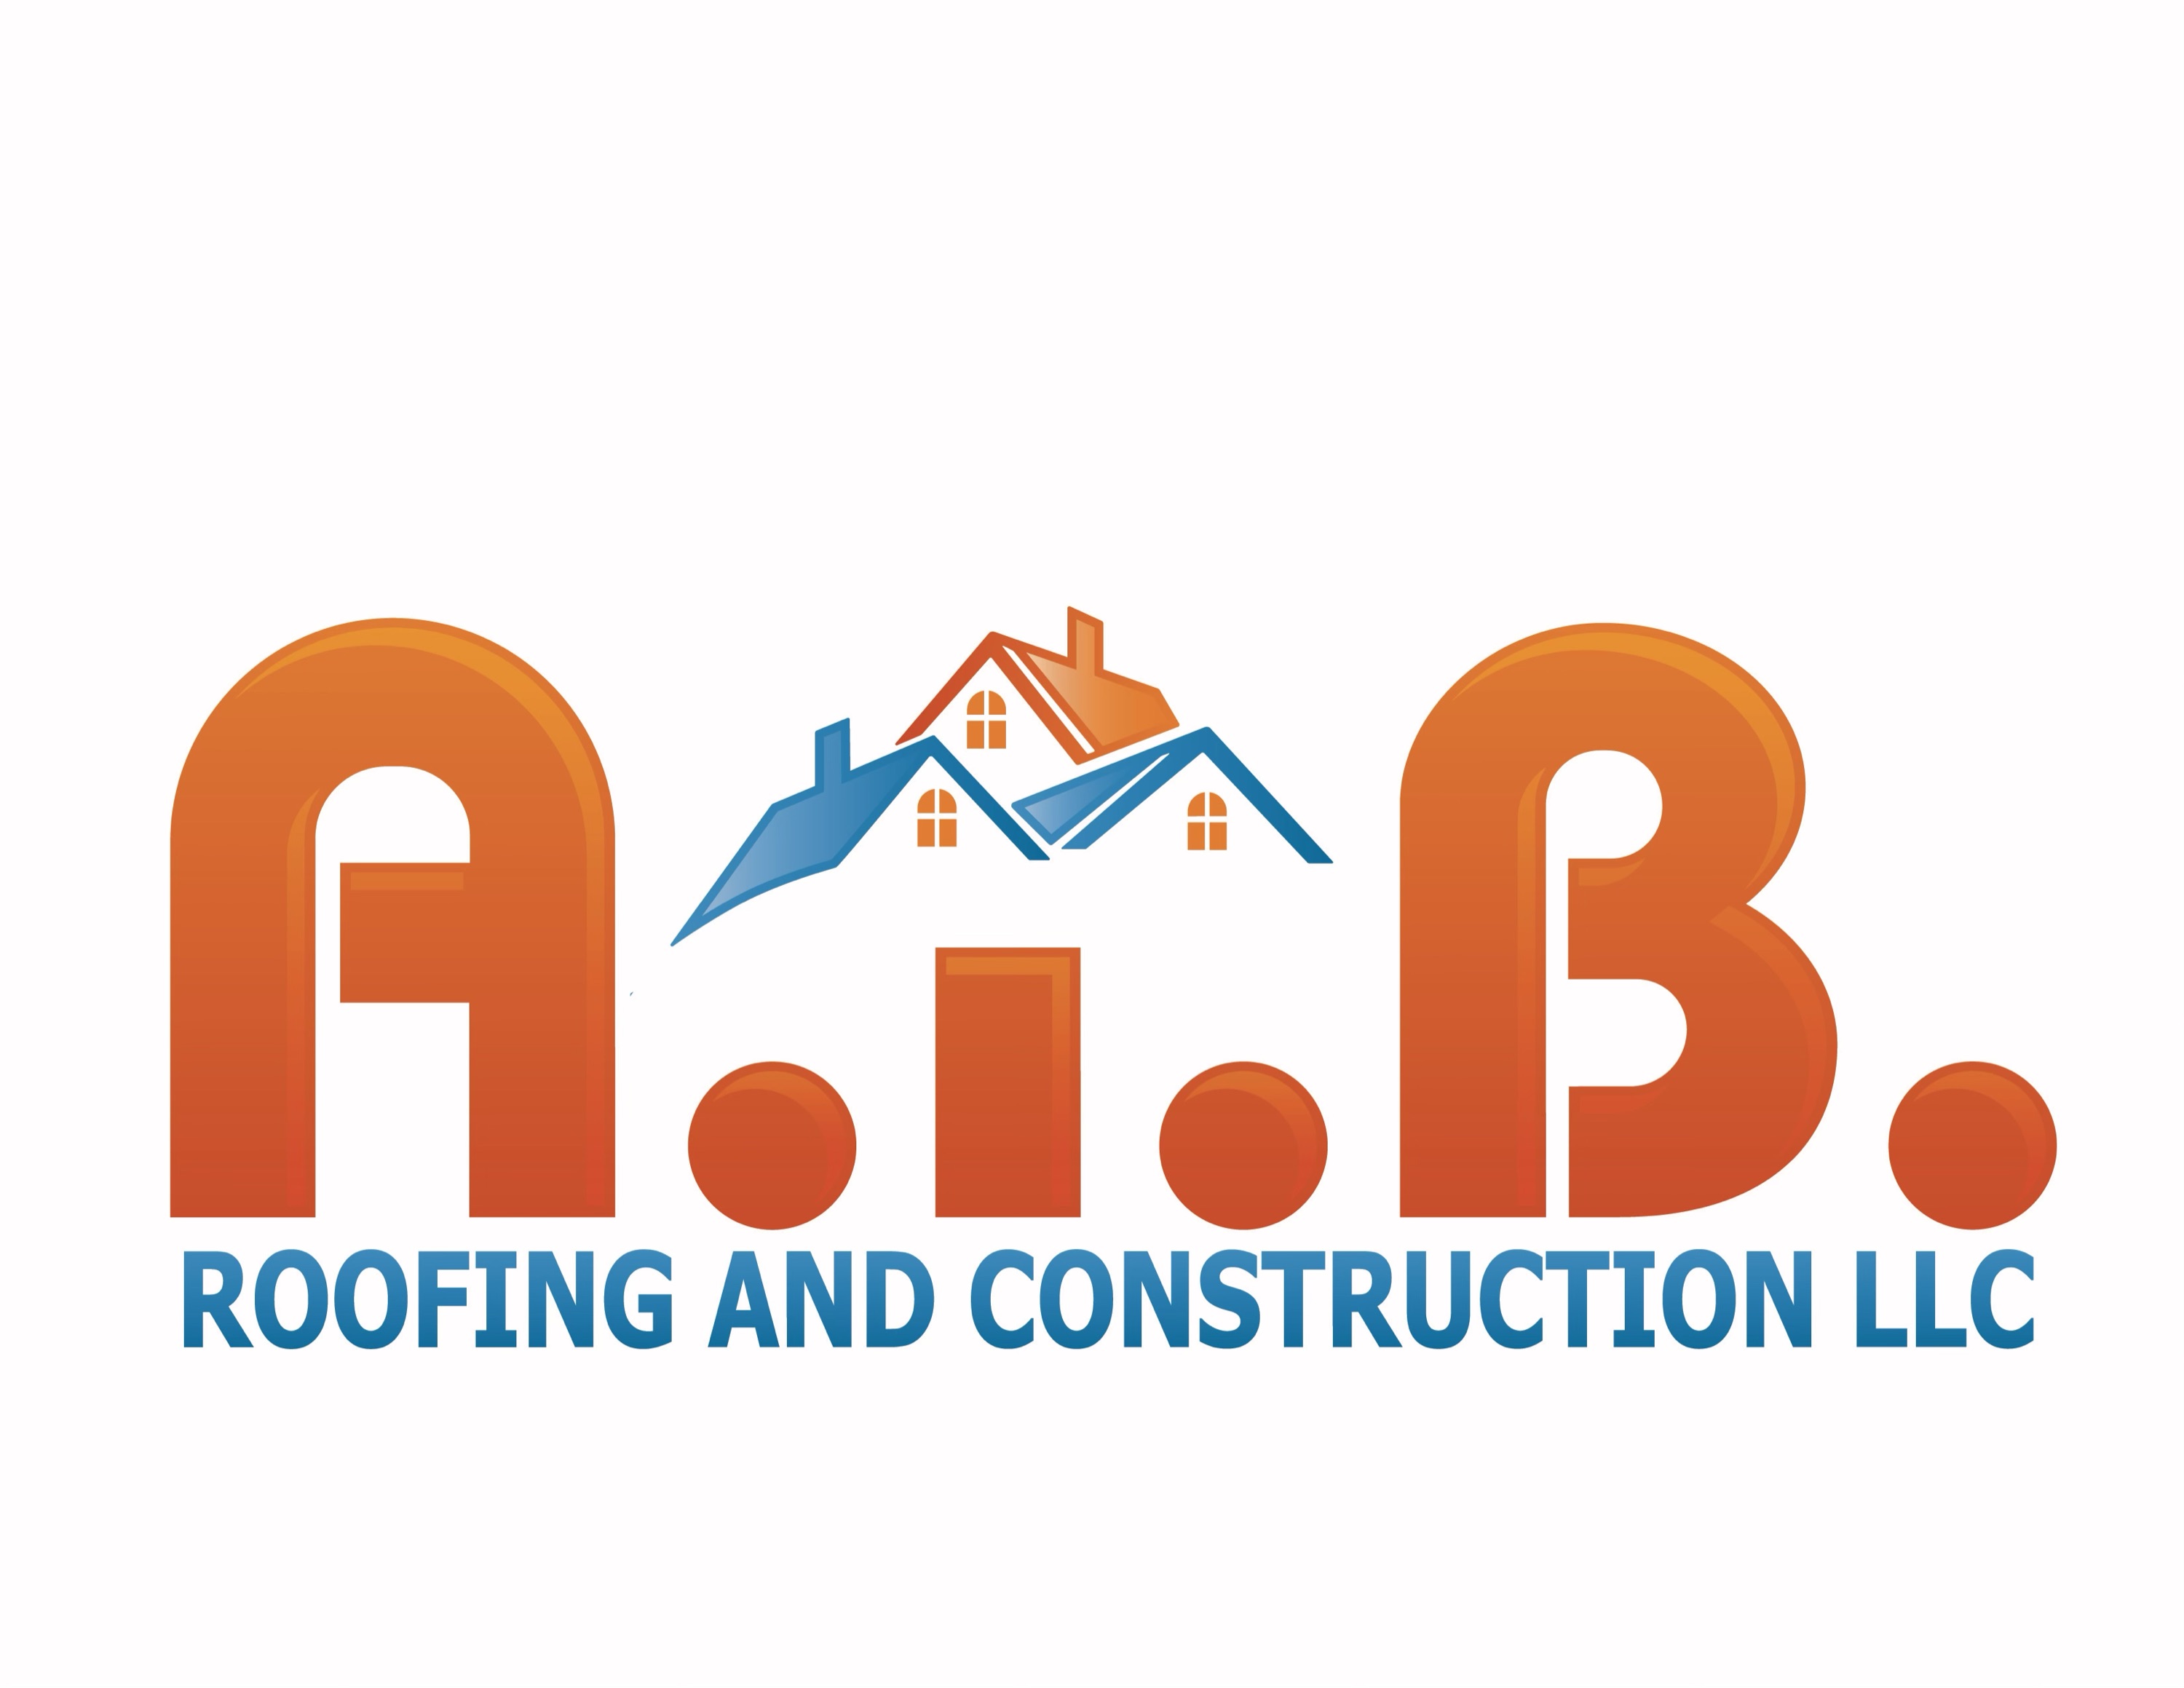 AIB Roofing and Construction LLC Logo